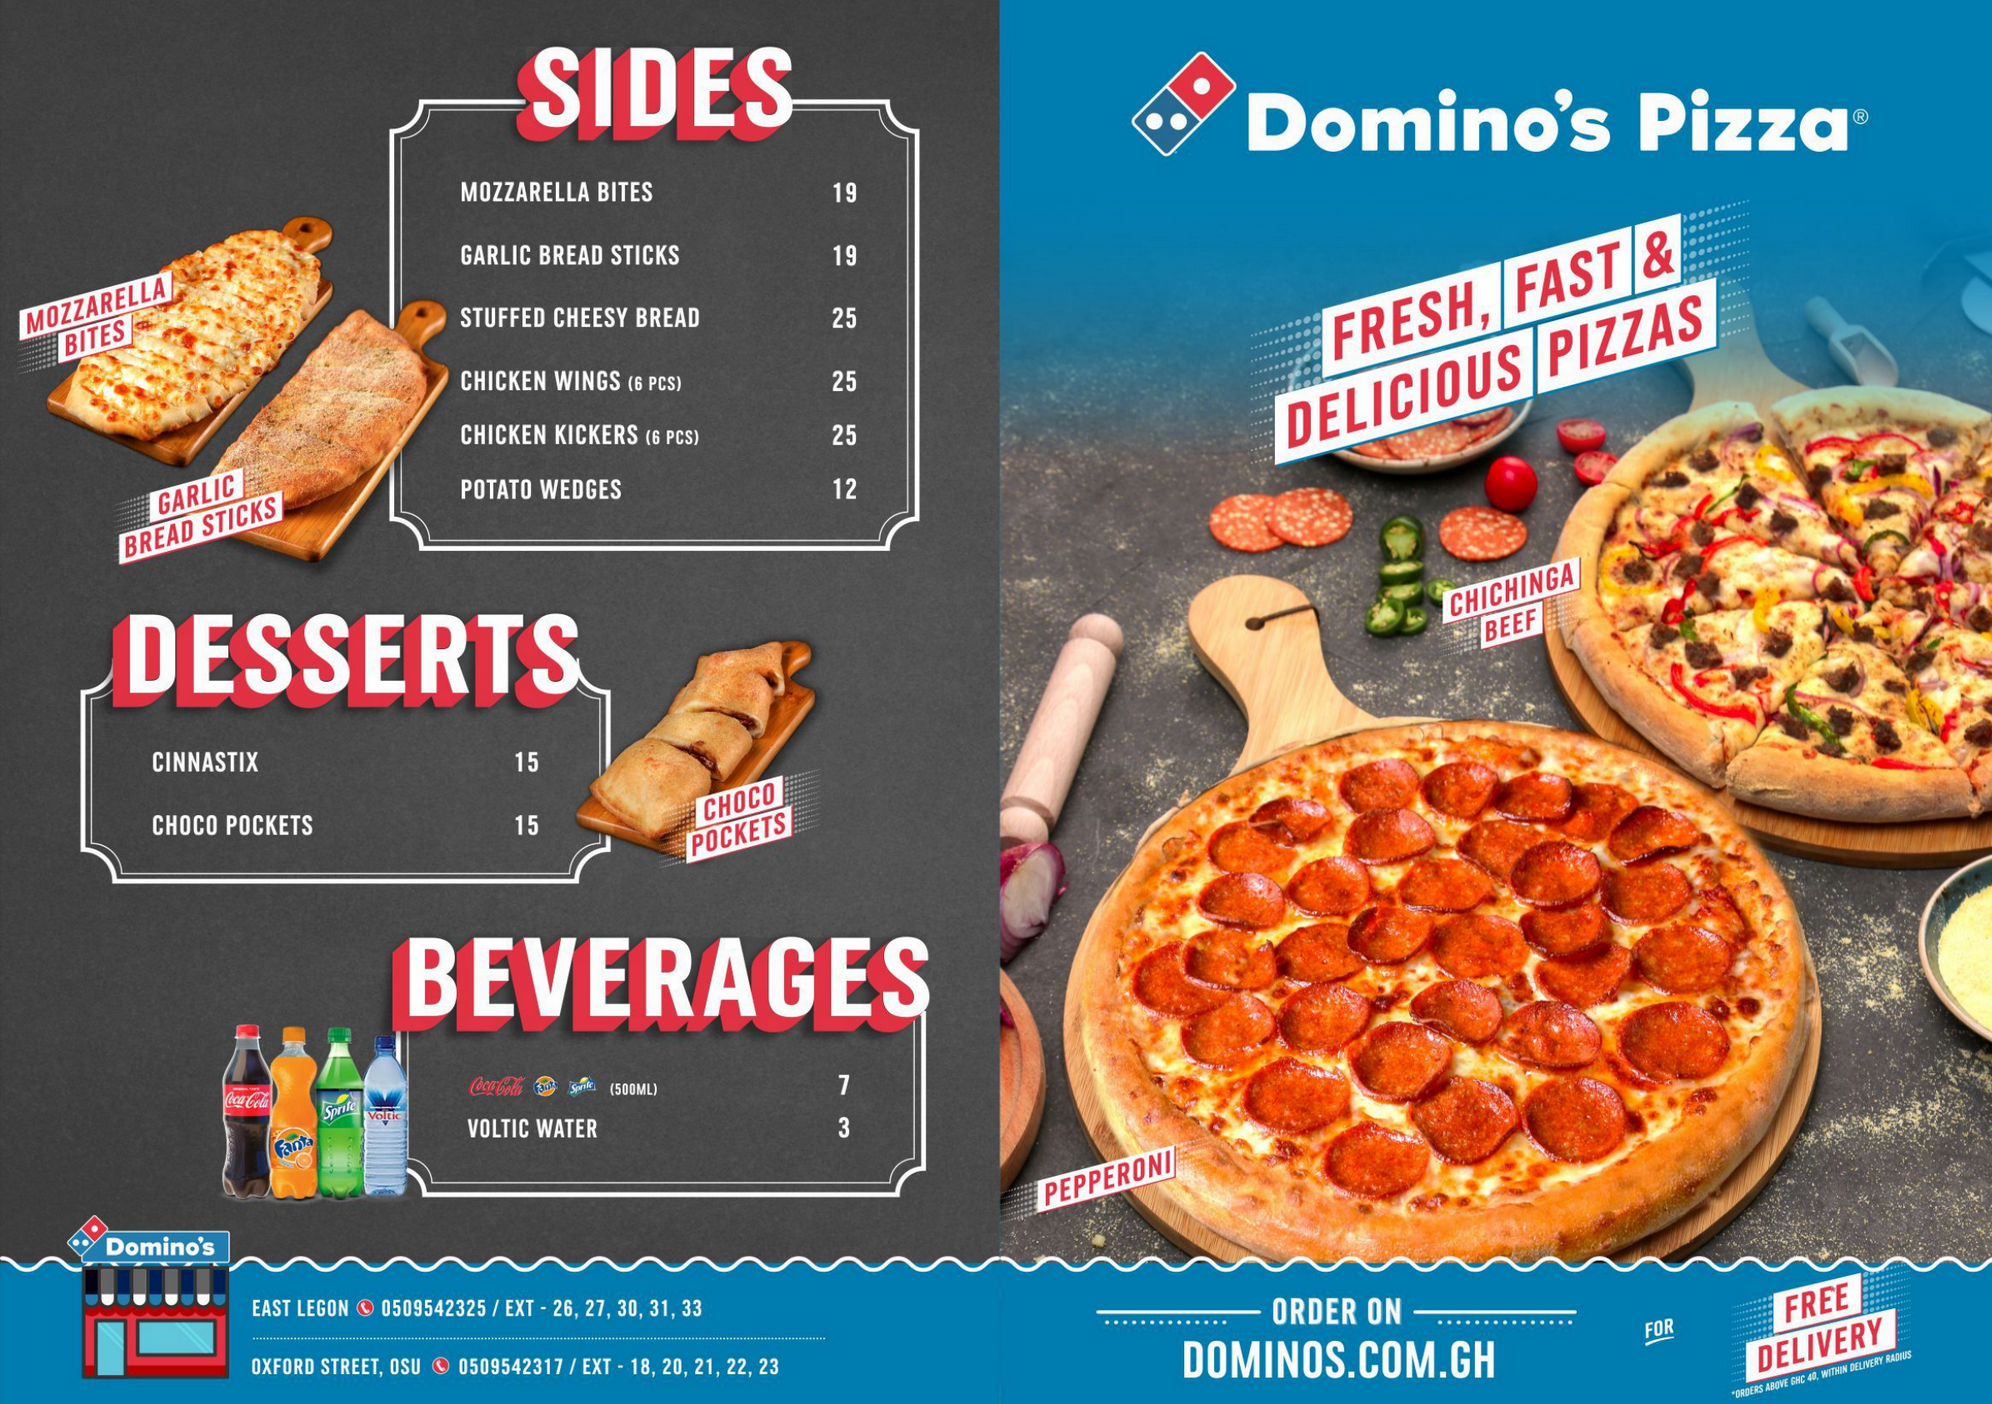 Dominos Pizza Ghana | Menu, Prices and Location 2